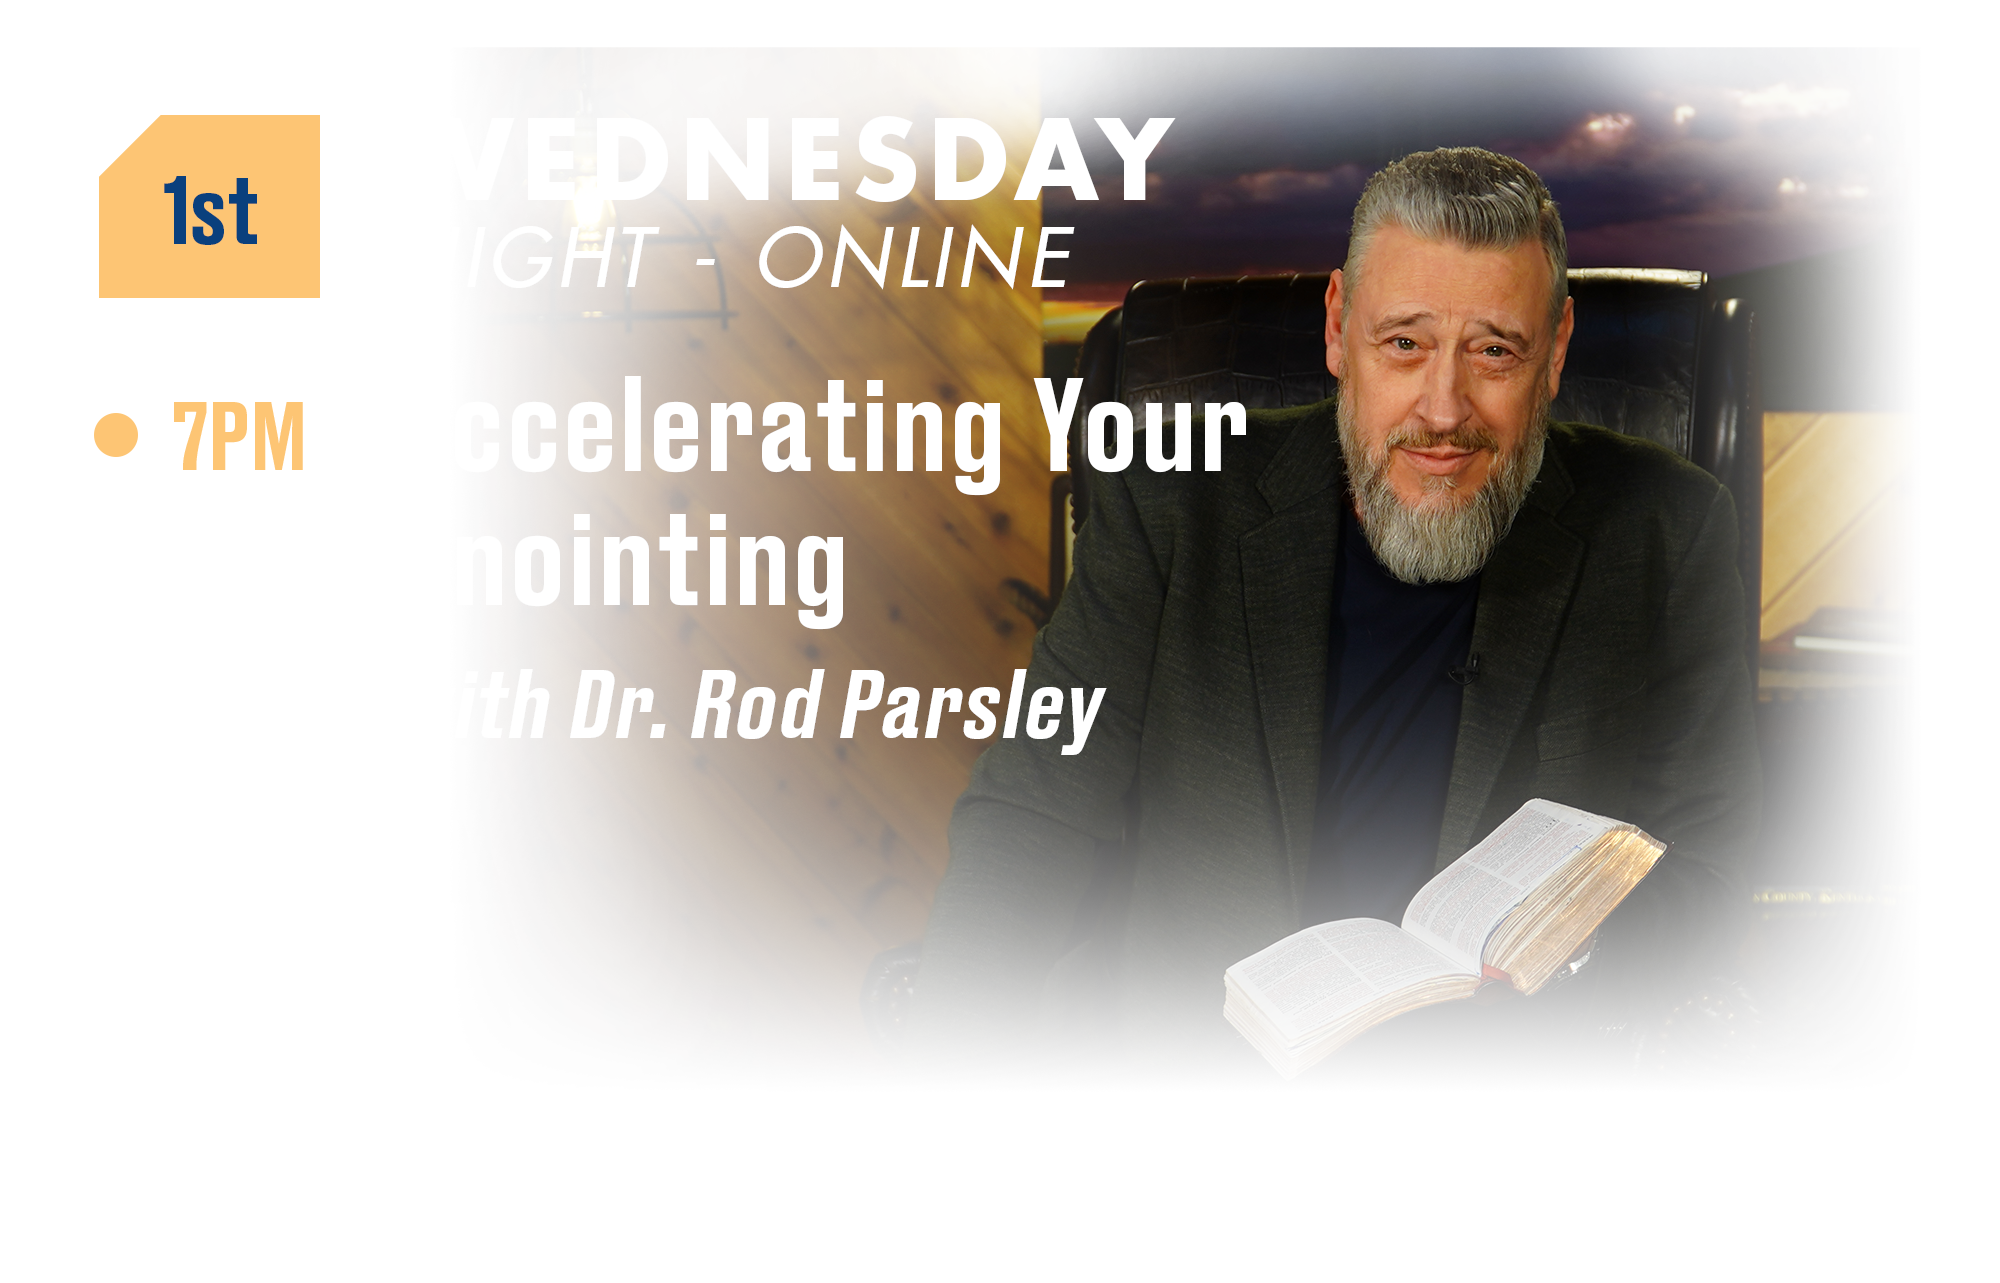 1st Wednesday Night - Online Accelerating Your Anointing with Dr. Rod Parsley